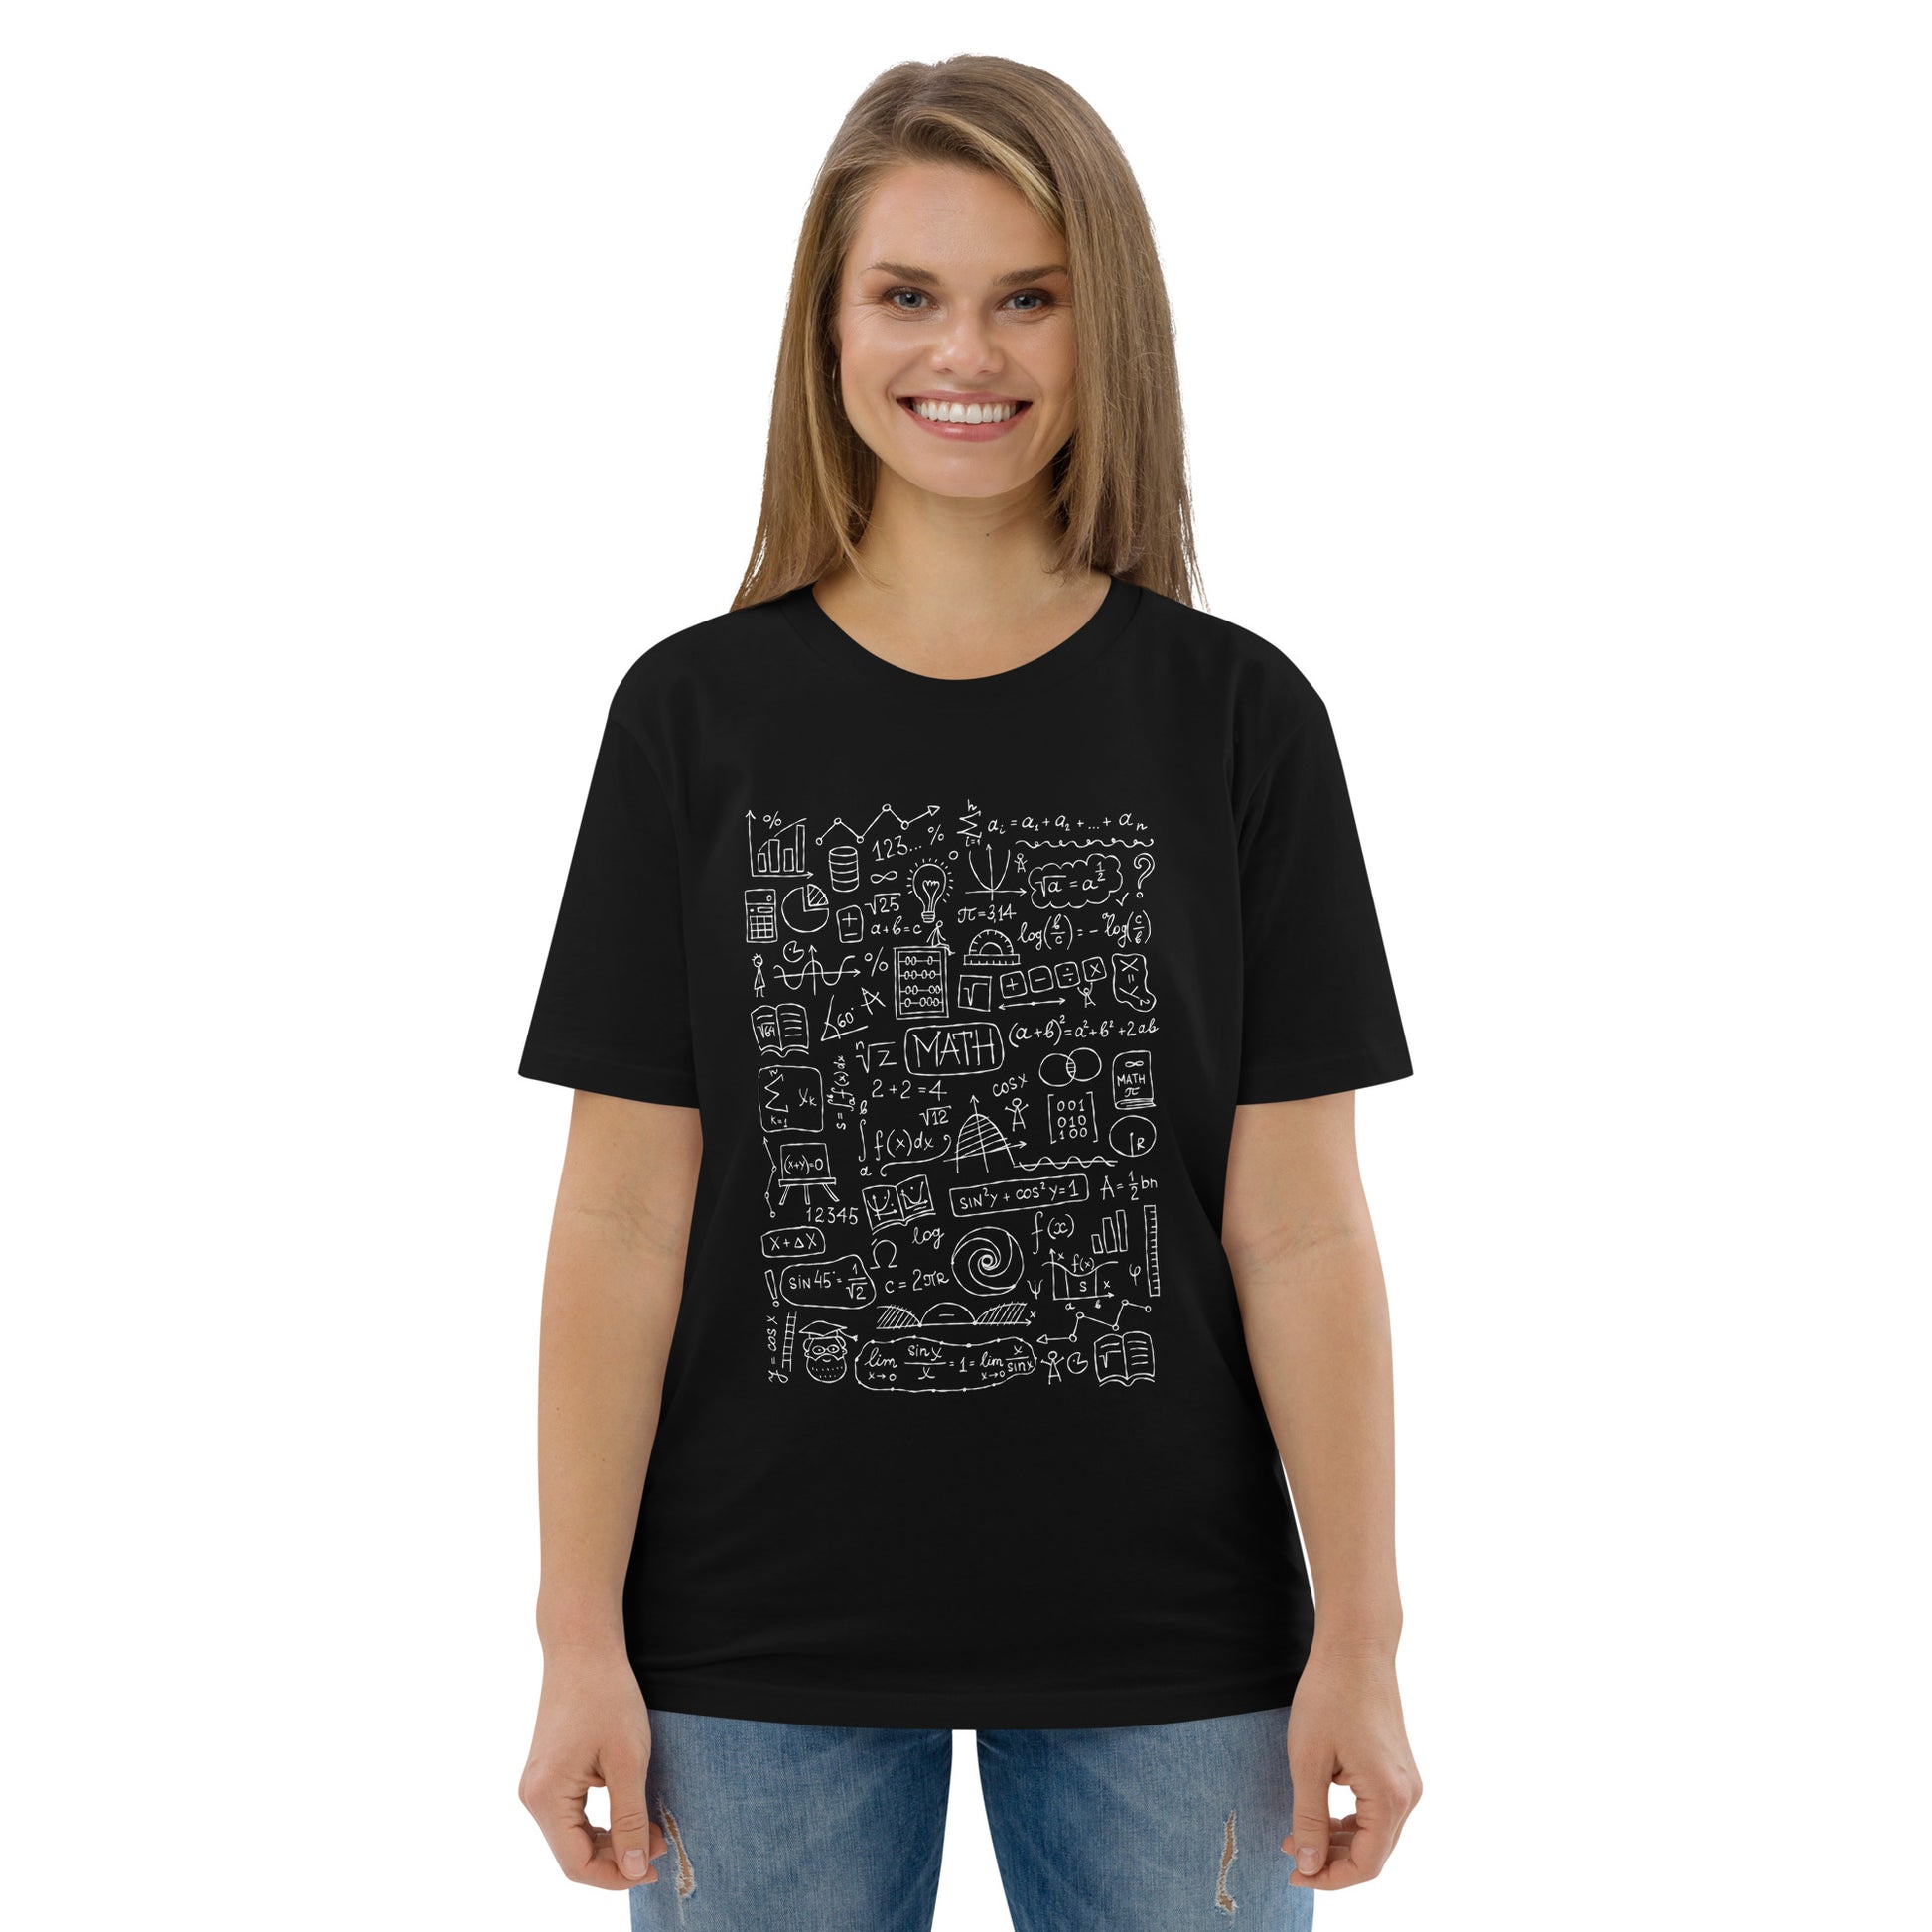 Smiling blondie Woman in Unisex black T-Shirt for Math Enthusiasts. with Hand-Drawn Math formulas and symbols. 